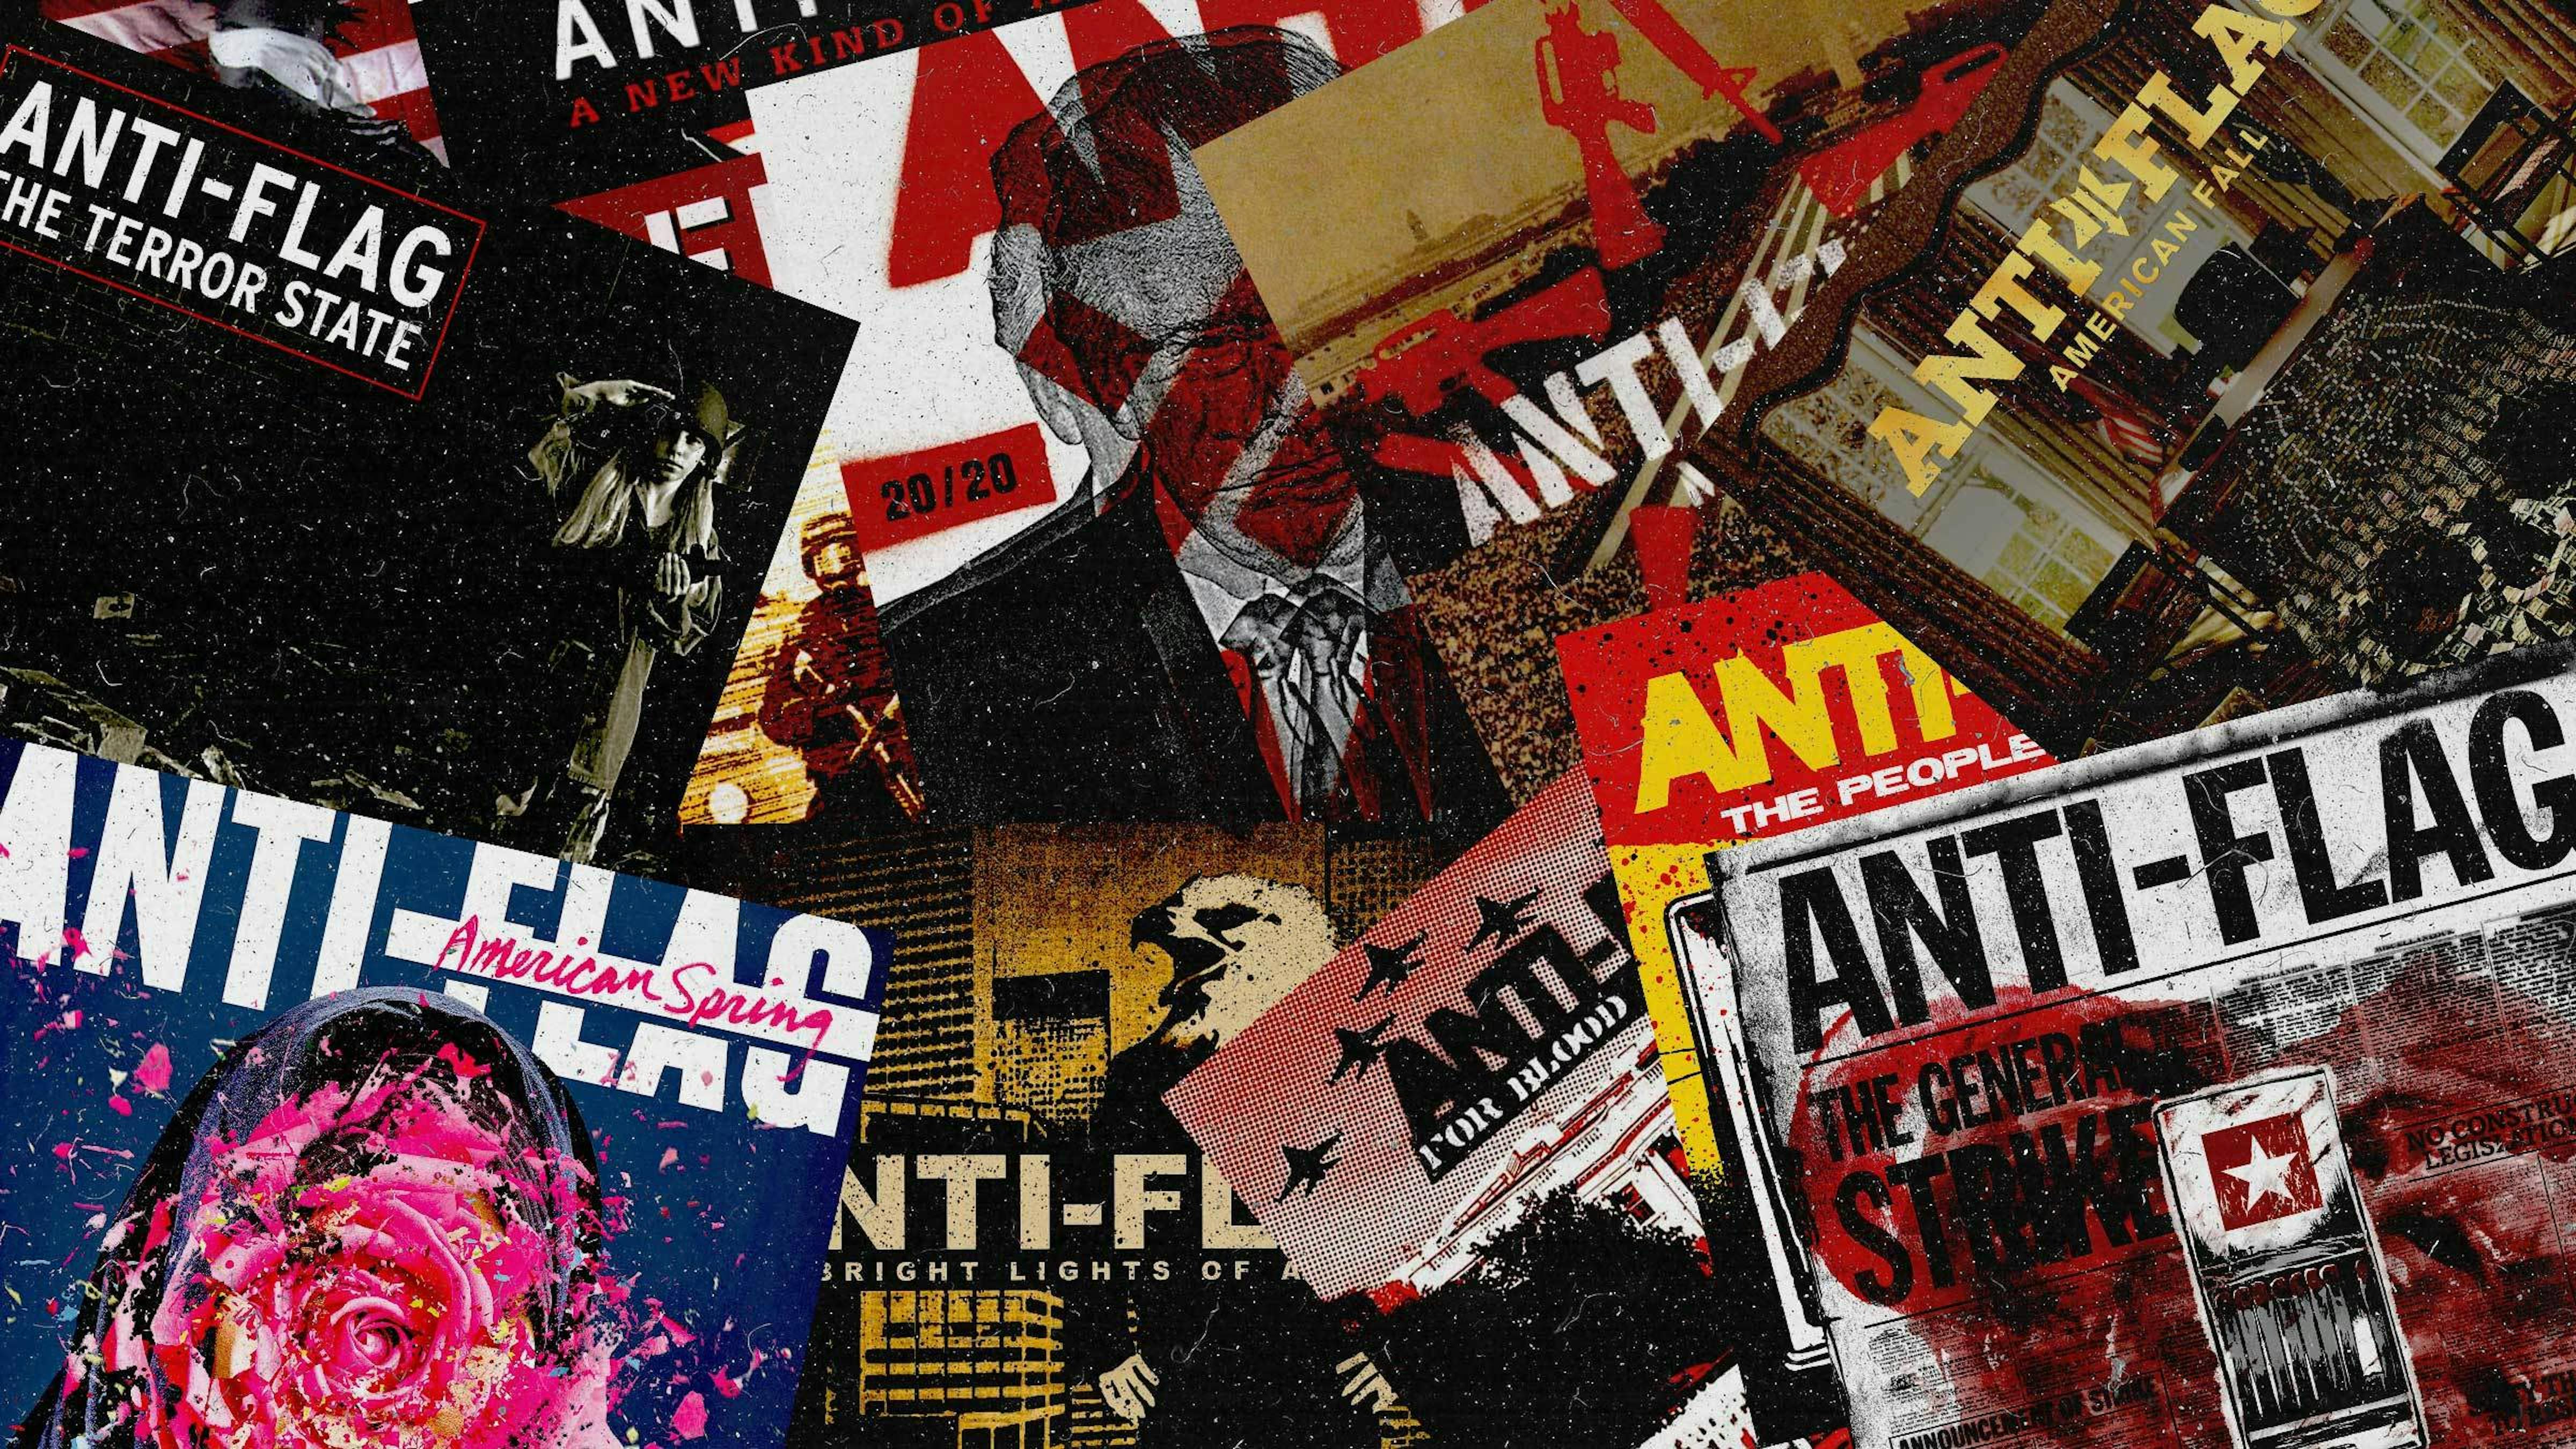 Every AntiFlag Album Ranked From Worst To Best By Chris#2 — Kerrang!